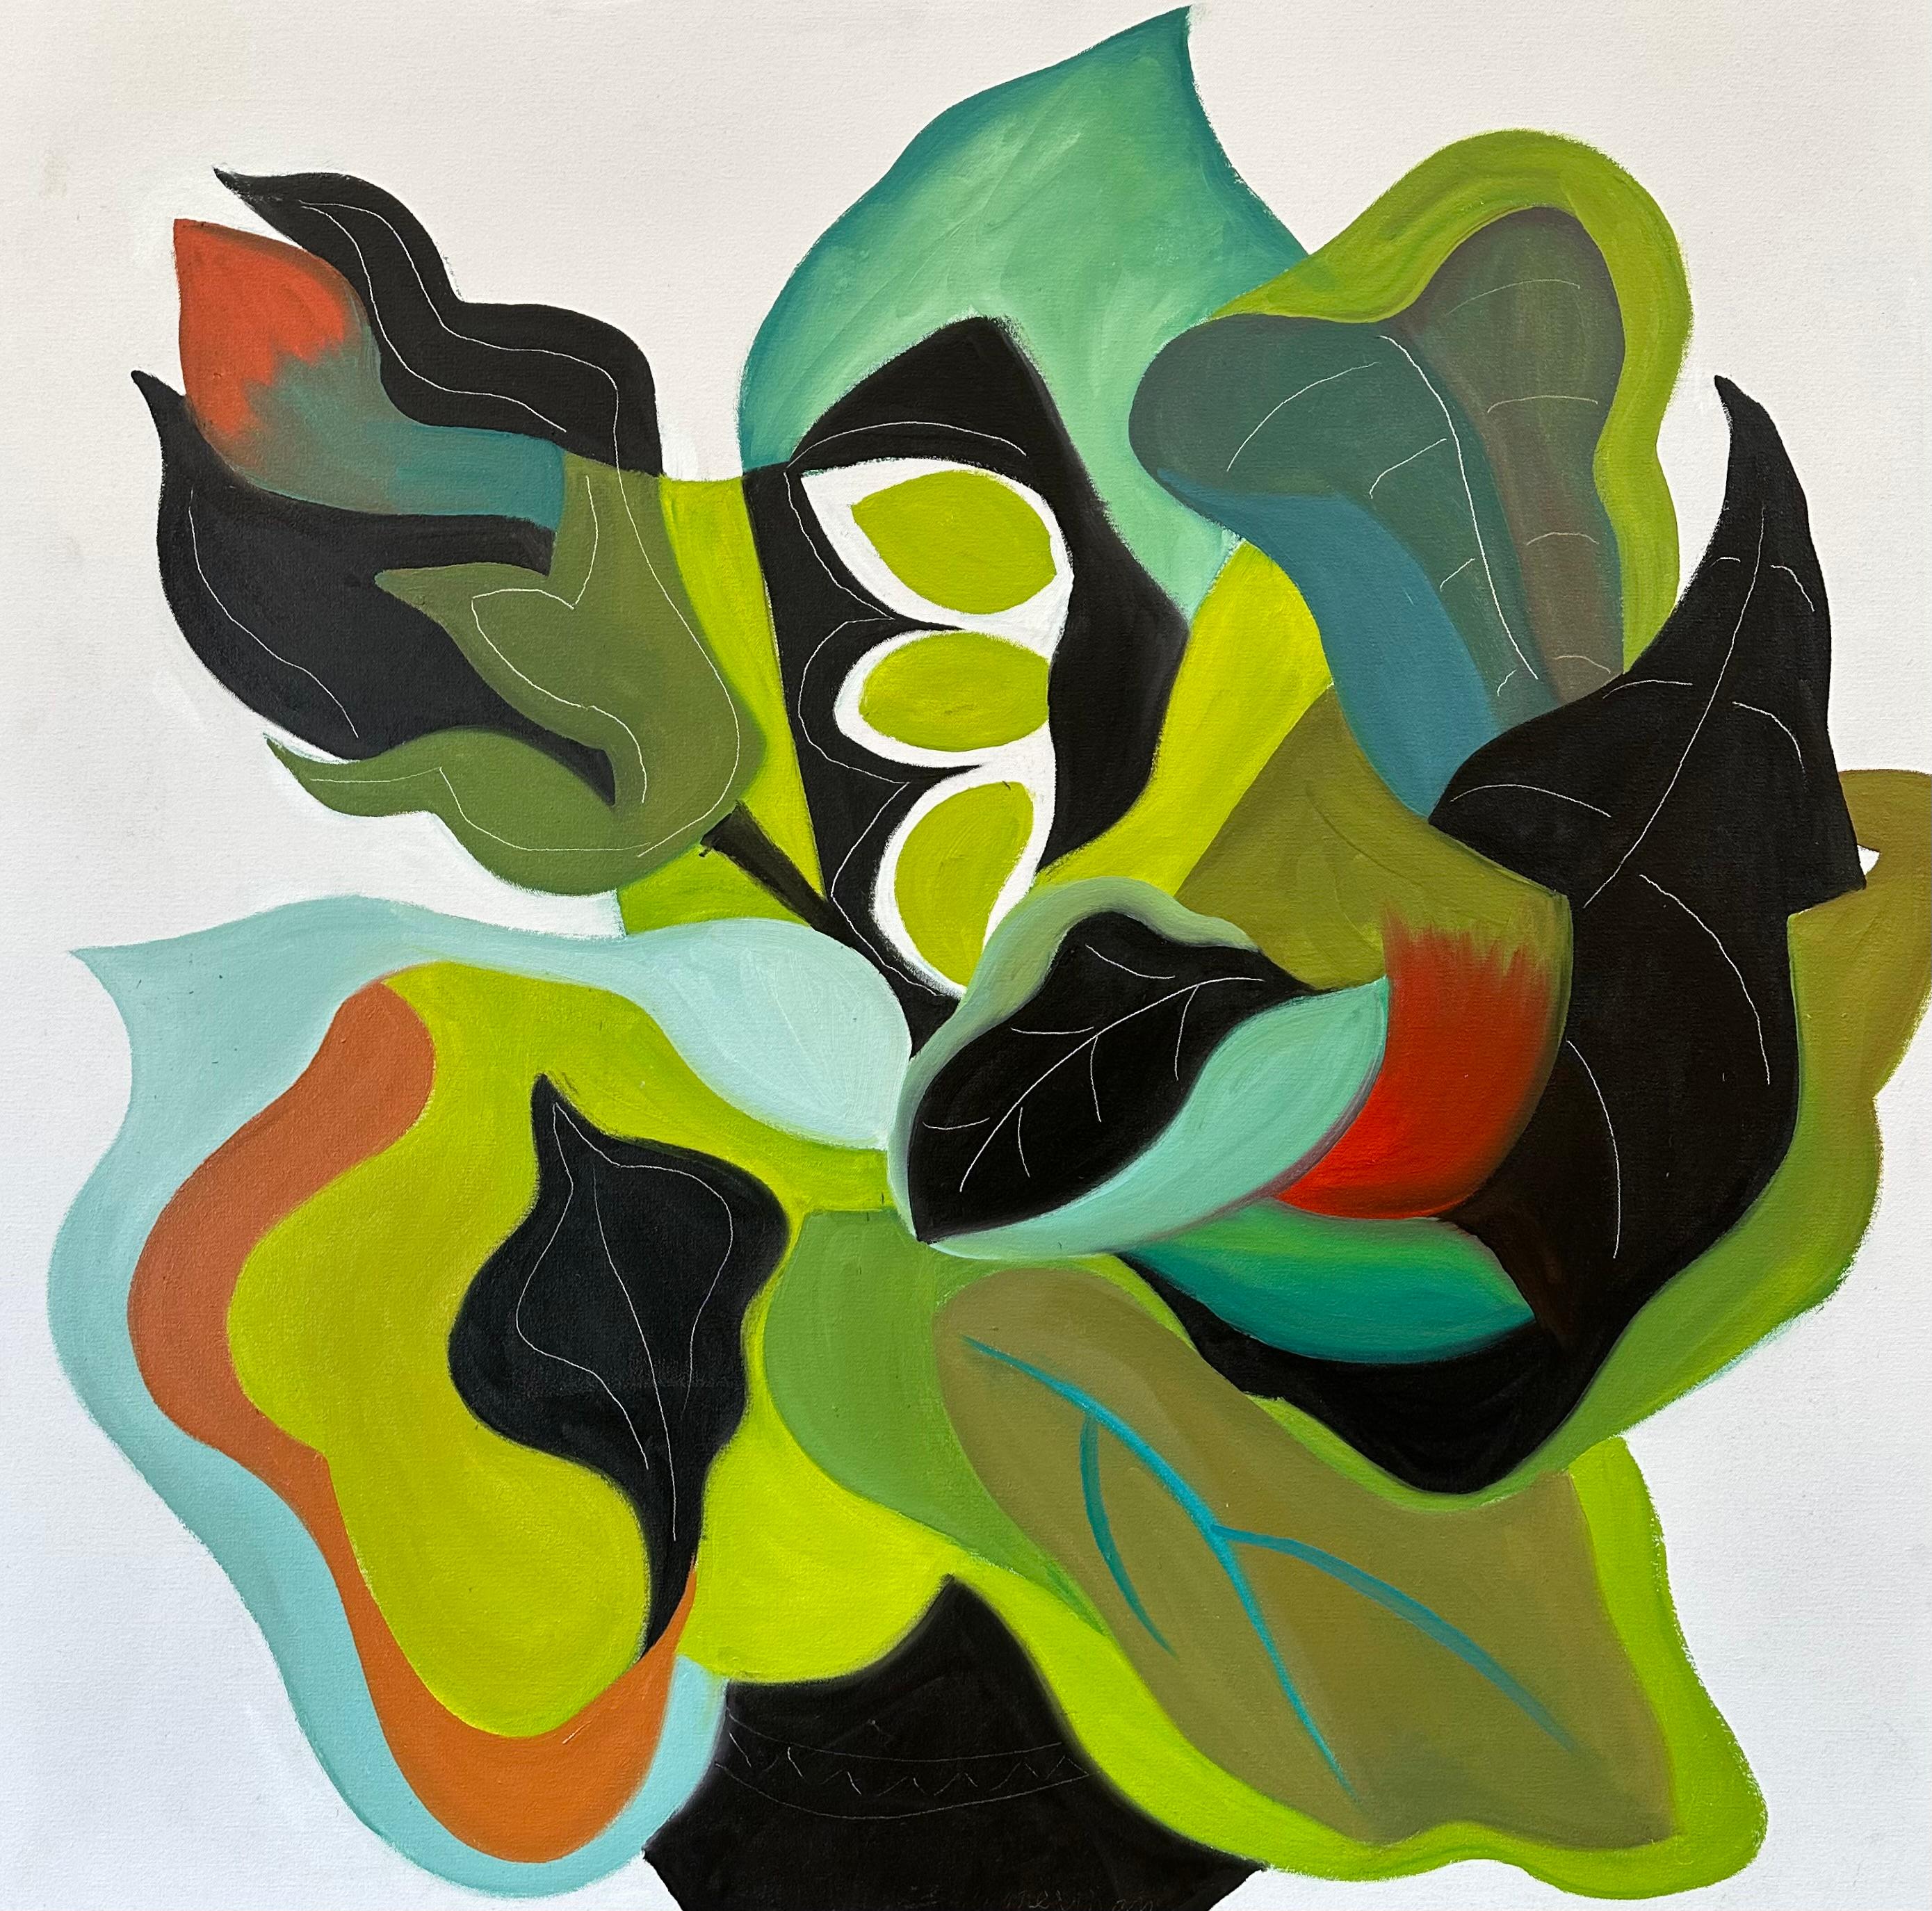 Spain - Chartreuse color - Abstract Floral Painting By Marc Zimmerman


Marc Zimmerman creates playful paintings, whether deep mysterious jungle or delightfully whimsical florals. His color palette explores various harmonies yet always surprises